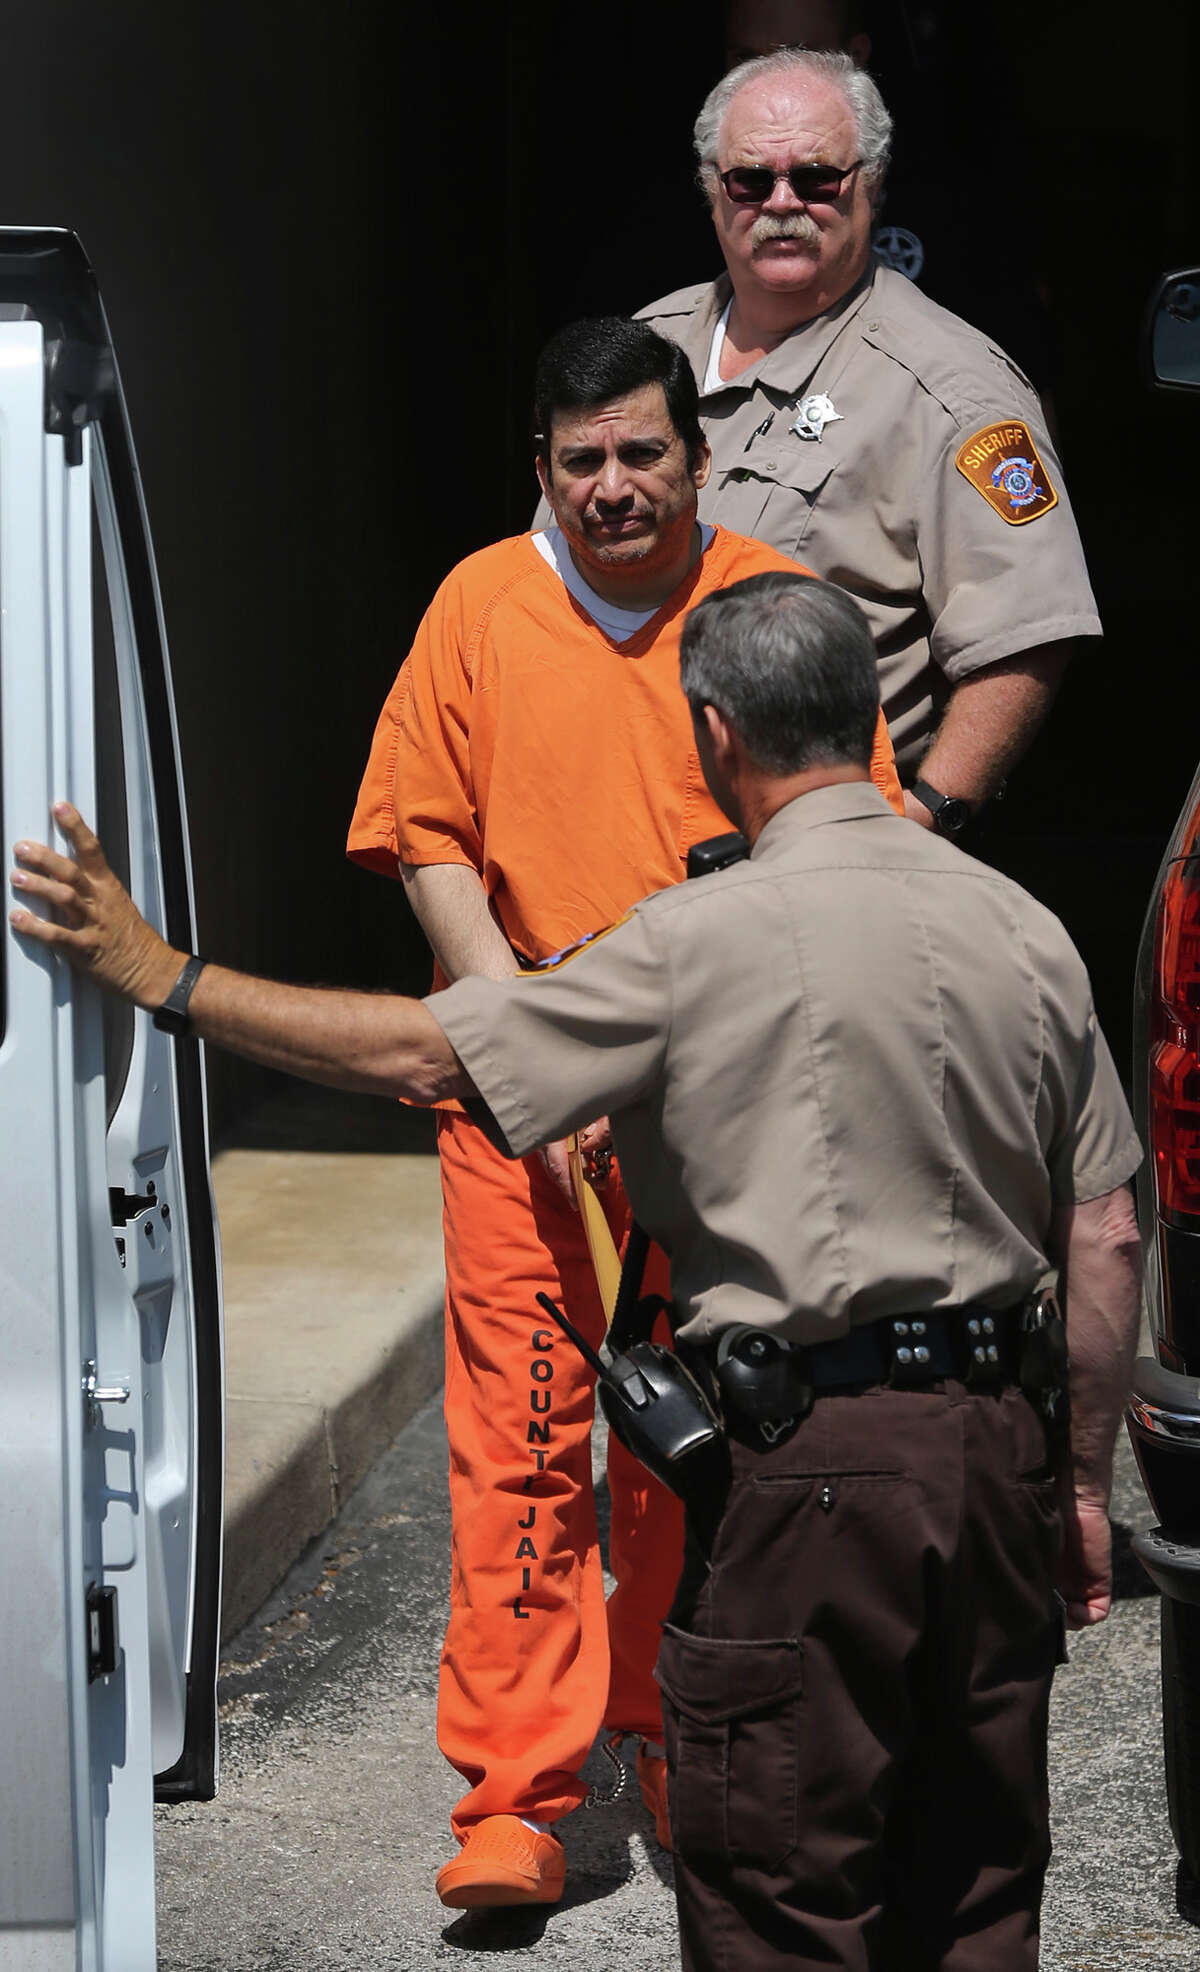 Ezequiel Rodriguez, (center, wearing orange jumpsuit) a reported associate of the Zetas, is escorted out of the back of the John H. Wood Federal Courthouse Tuesday April 7, 2015 in San Antonio, Texas. Rodriguez allegedly booked music acts for the cartel and was arrested in 2013 on a drug charge after being a fugitive for a while.